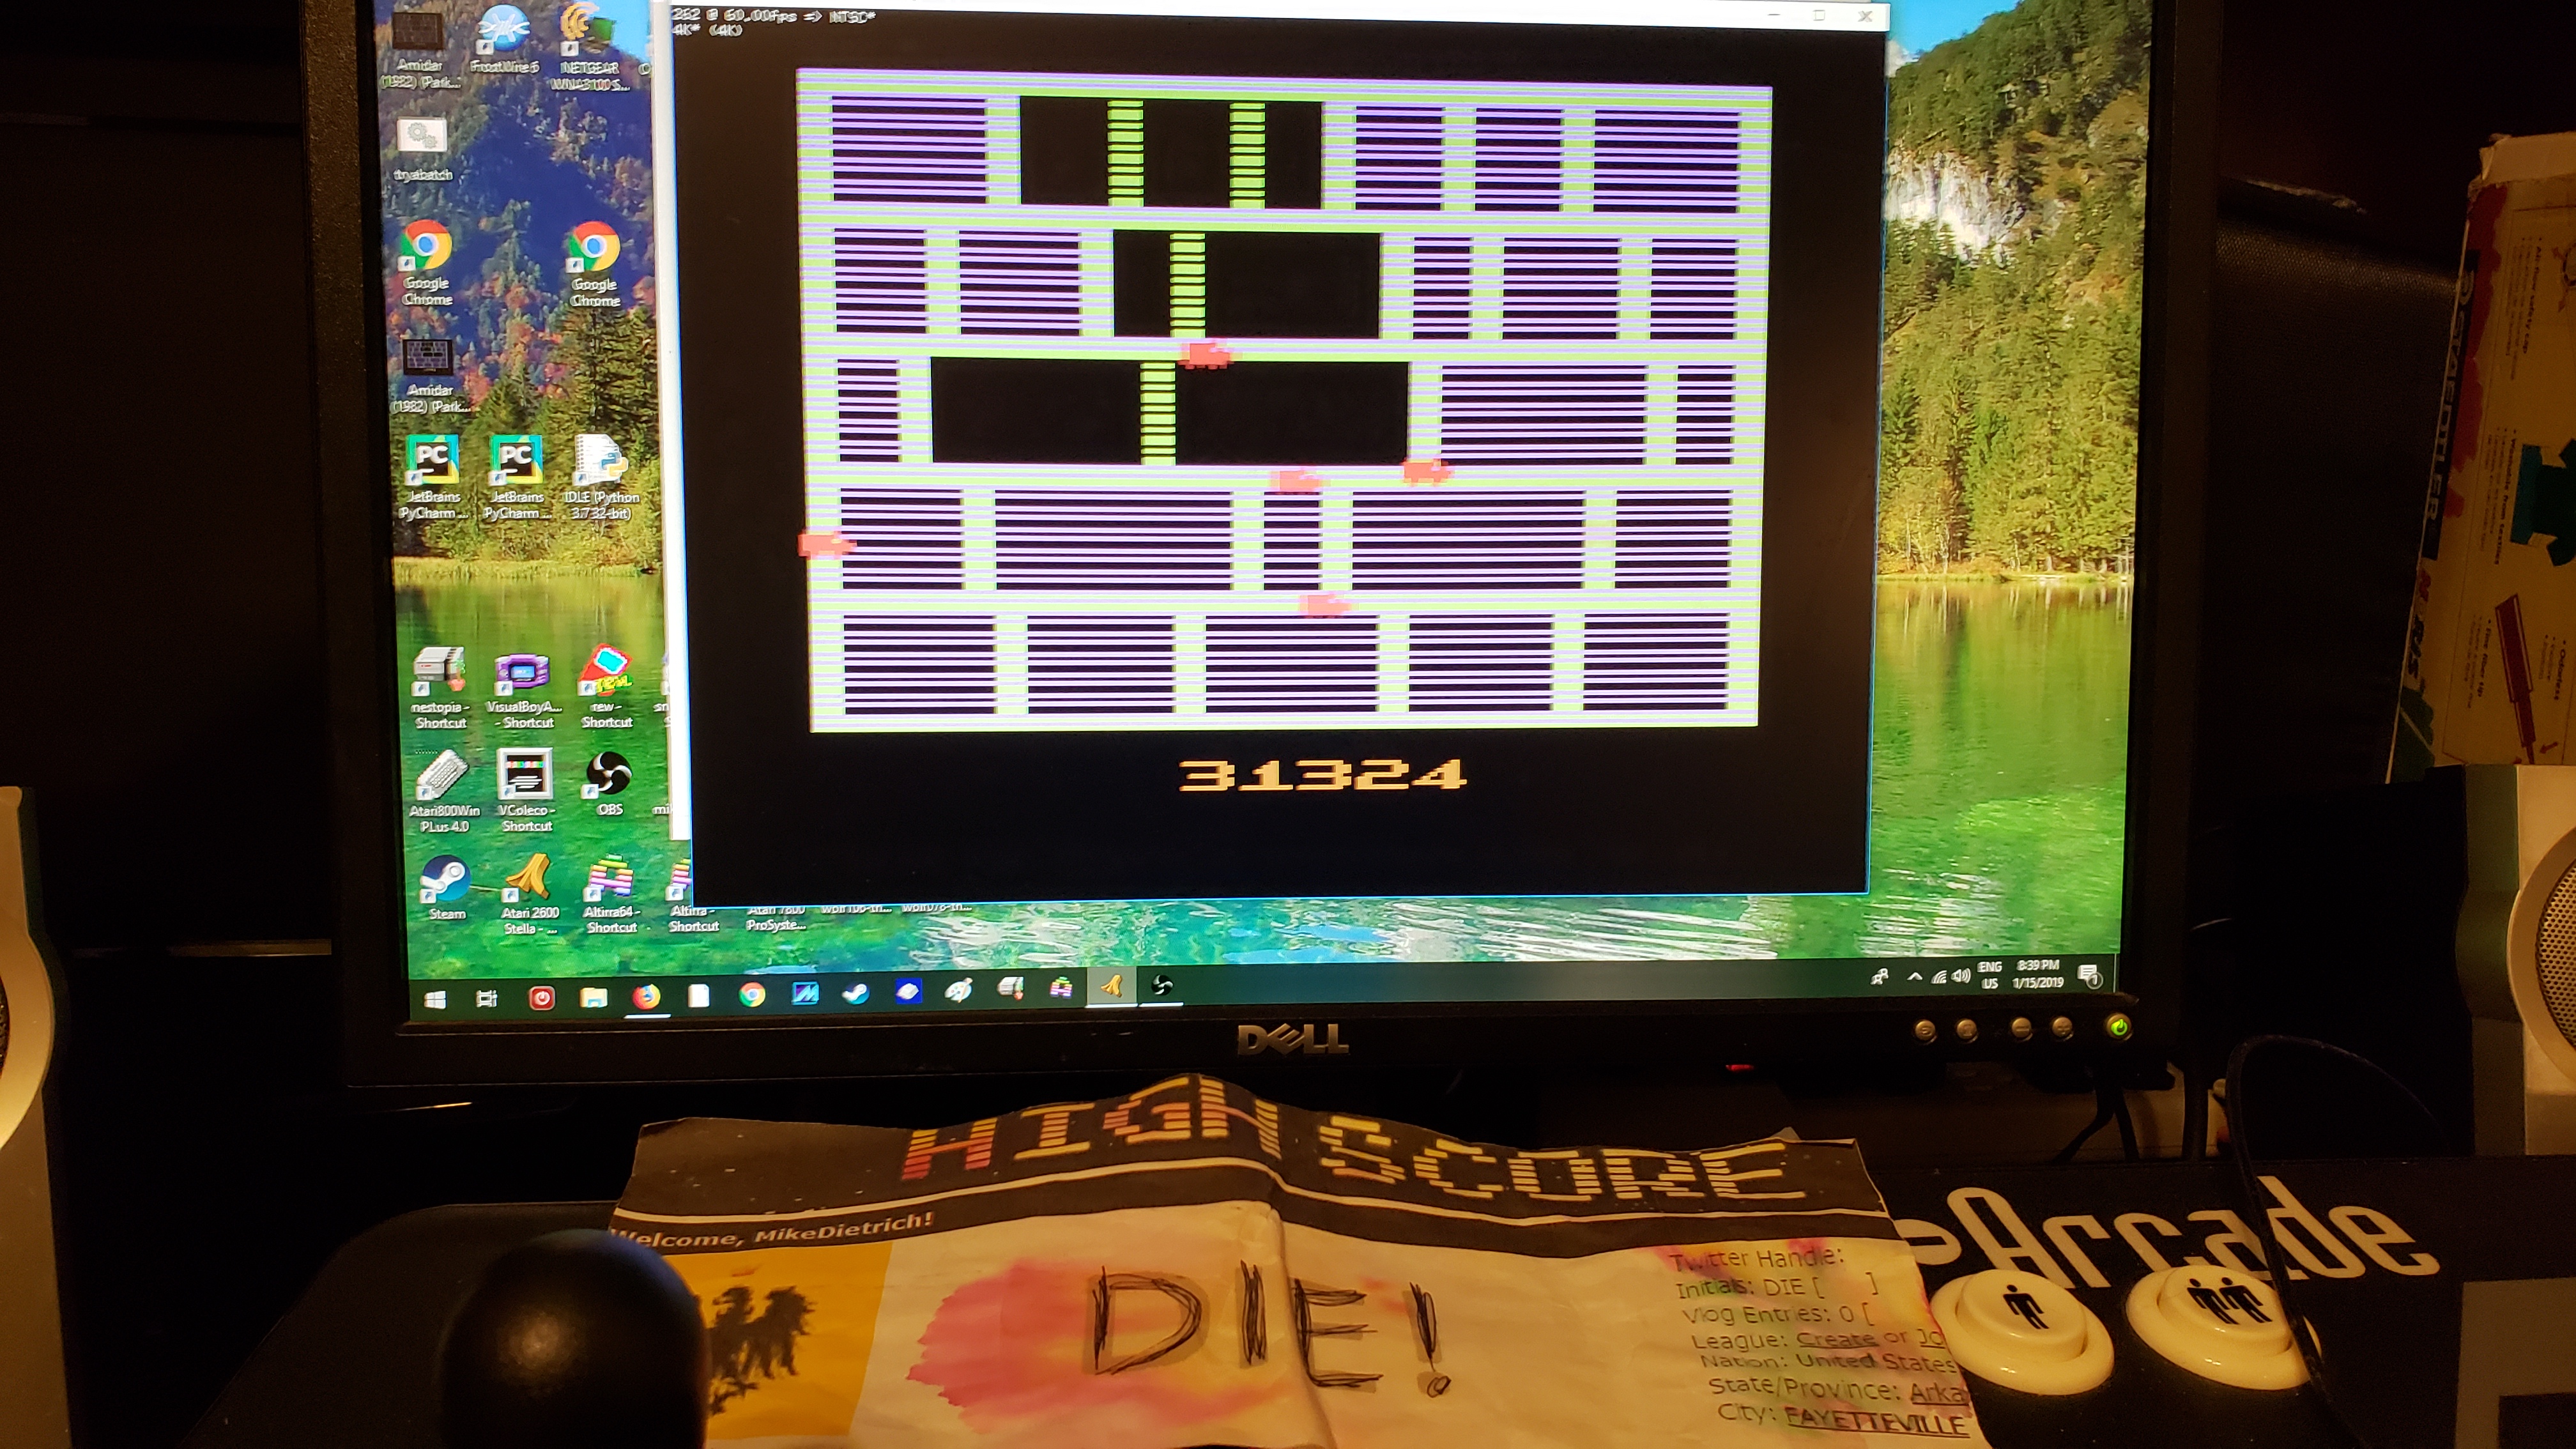 MikeDietrich: Amidar (Atari 2600 Emulated Novice/B Mode) 31,324 points on 2019-01-15 19:40:57